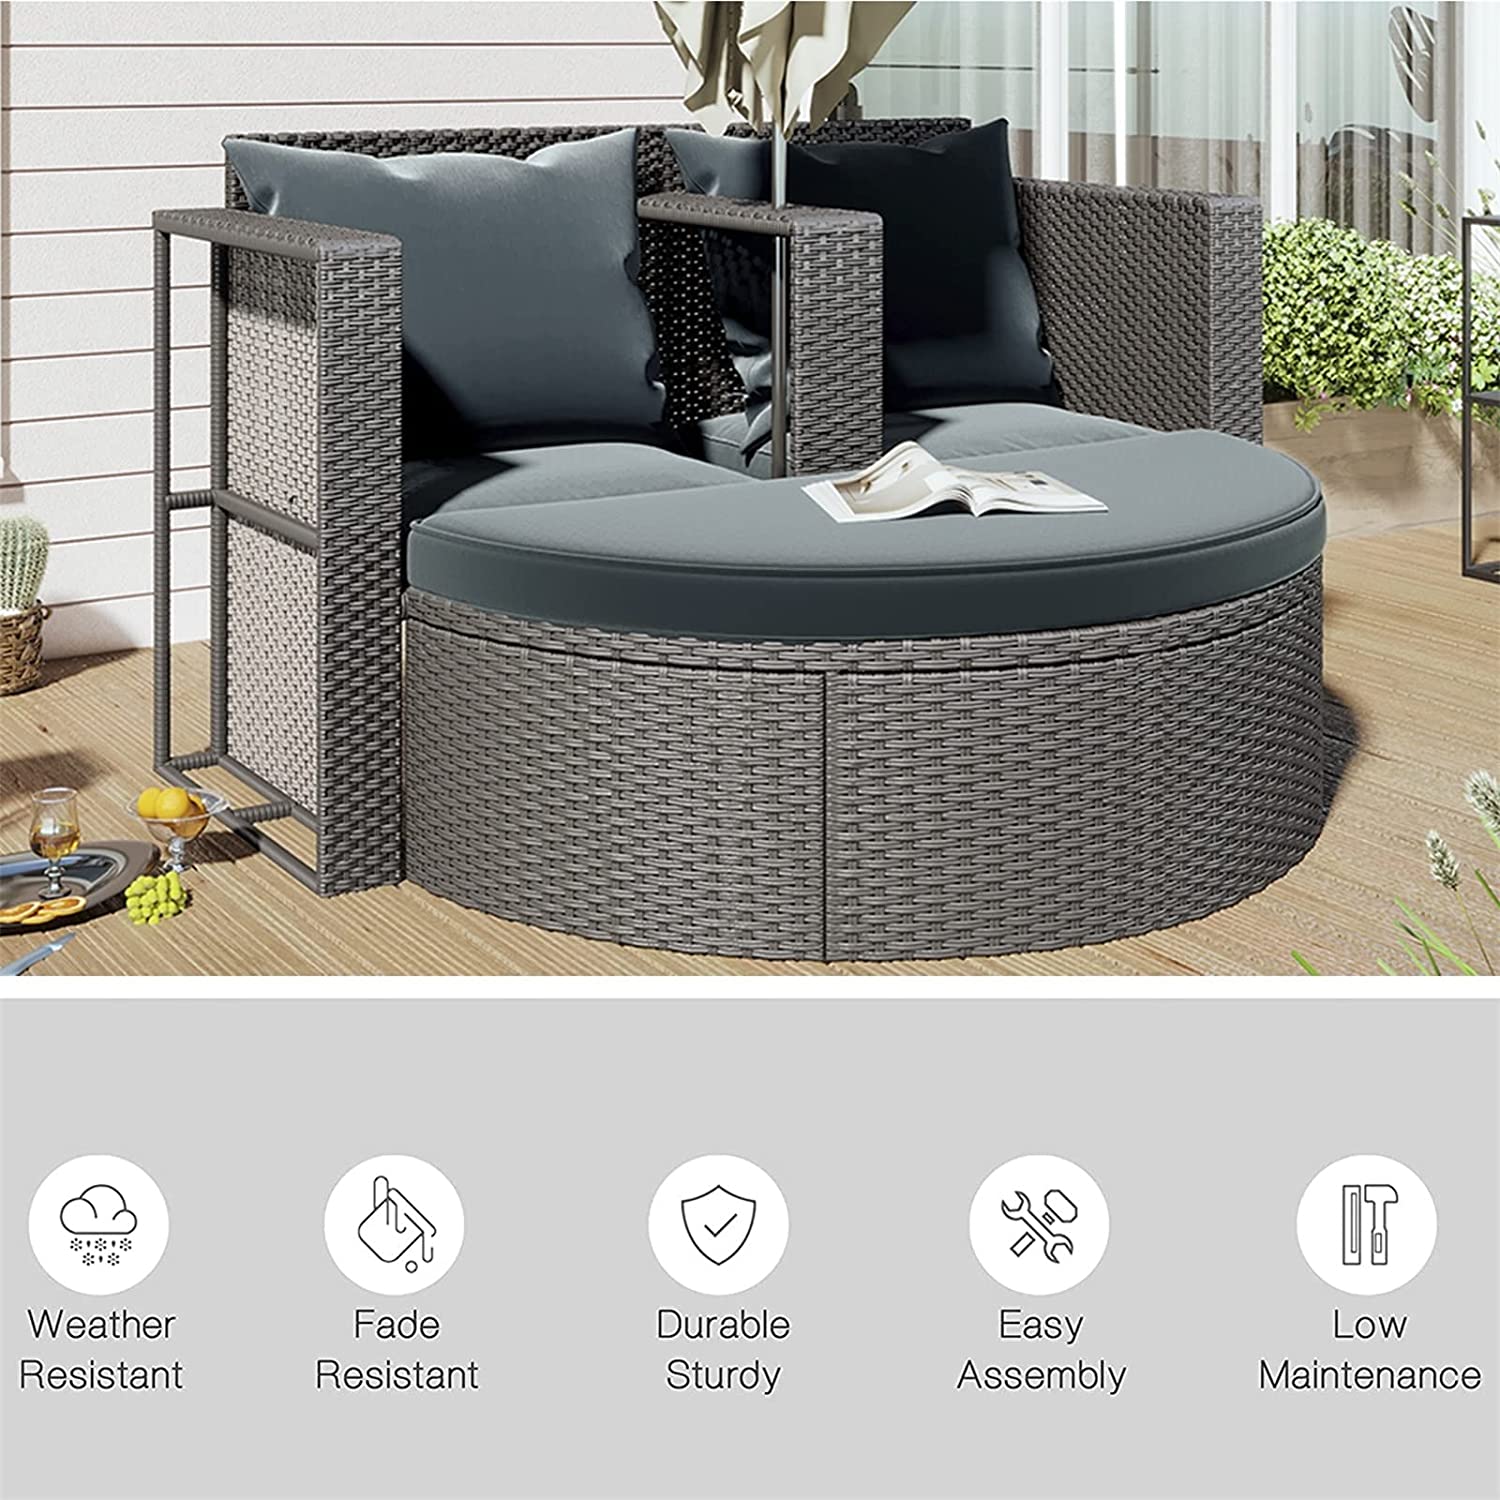 Outdoor Garden Patio Sofa Sets with Side Table for Umbrella, SEGMART Newest 2 Pieces Wicker Patio Furniture Set with Removable Seat Cushions & Half-Moon Sofa for Porch, Backyard, 300lbs, S1542 - image 2 of 9